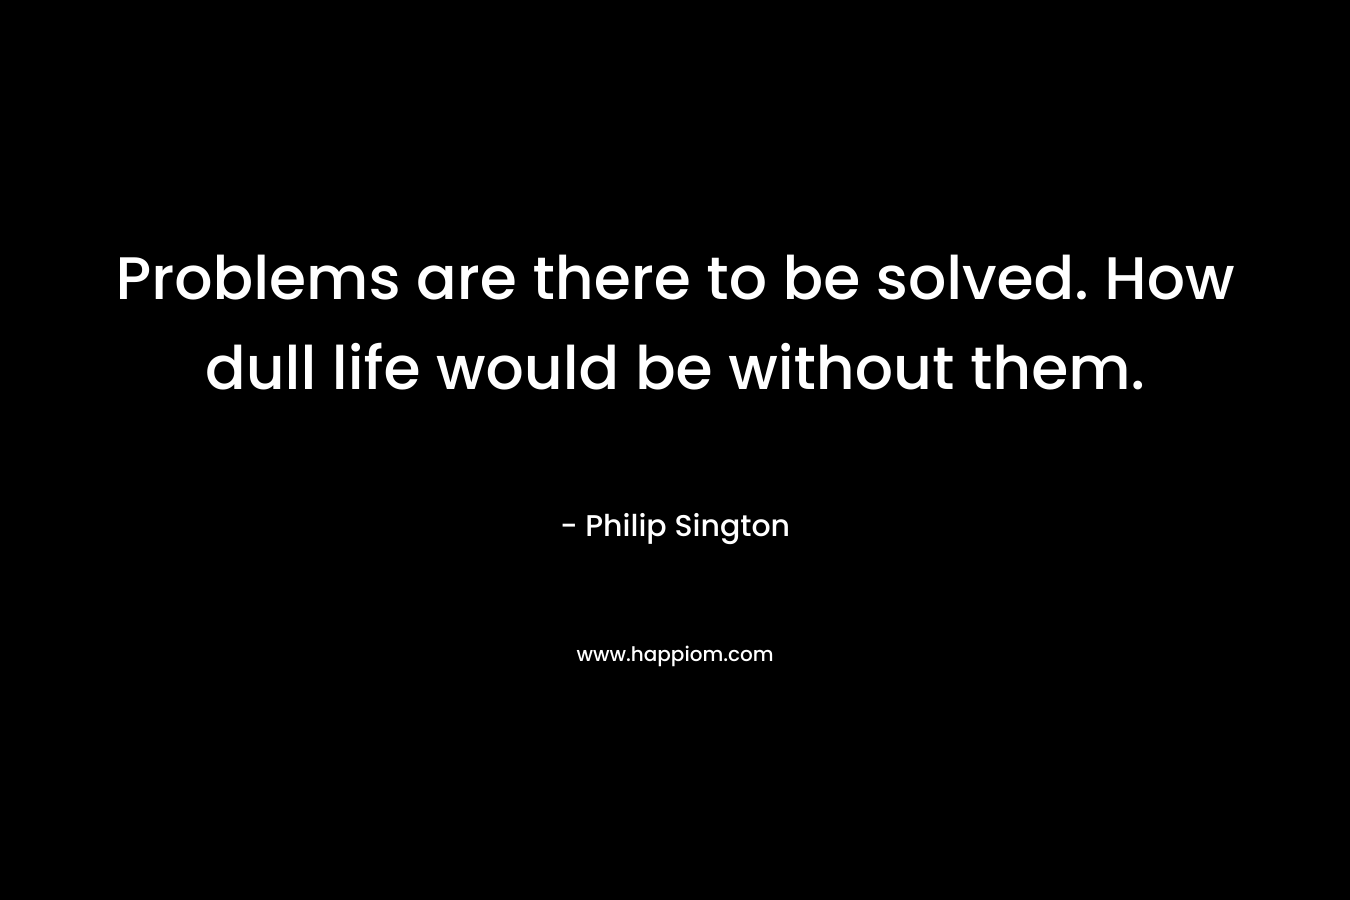 Problems are there to be solved. How dull life would be without them. – Philip Sington